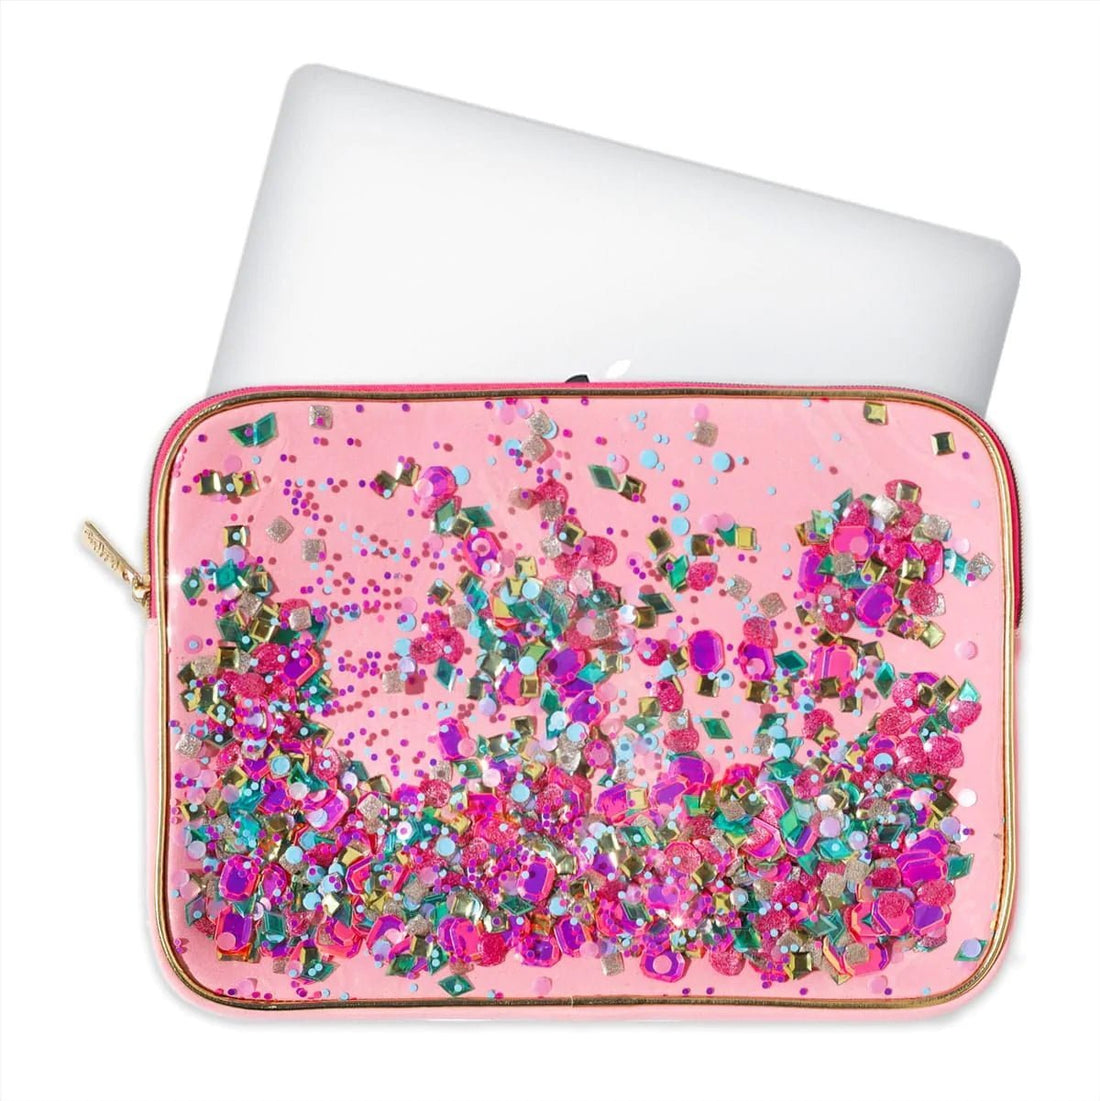 Shop Packed Party Be A Gem Laptop Sleeve - Premium Laptop Case from Packed Party Online now at Spoiled Brat 